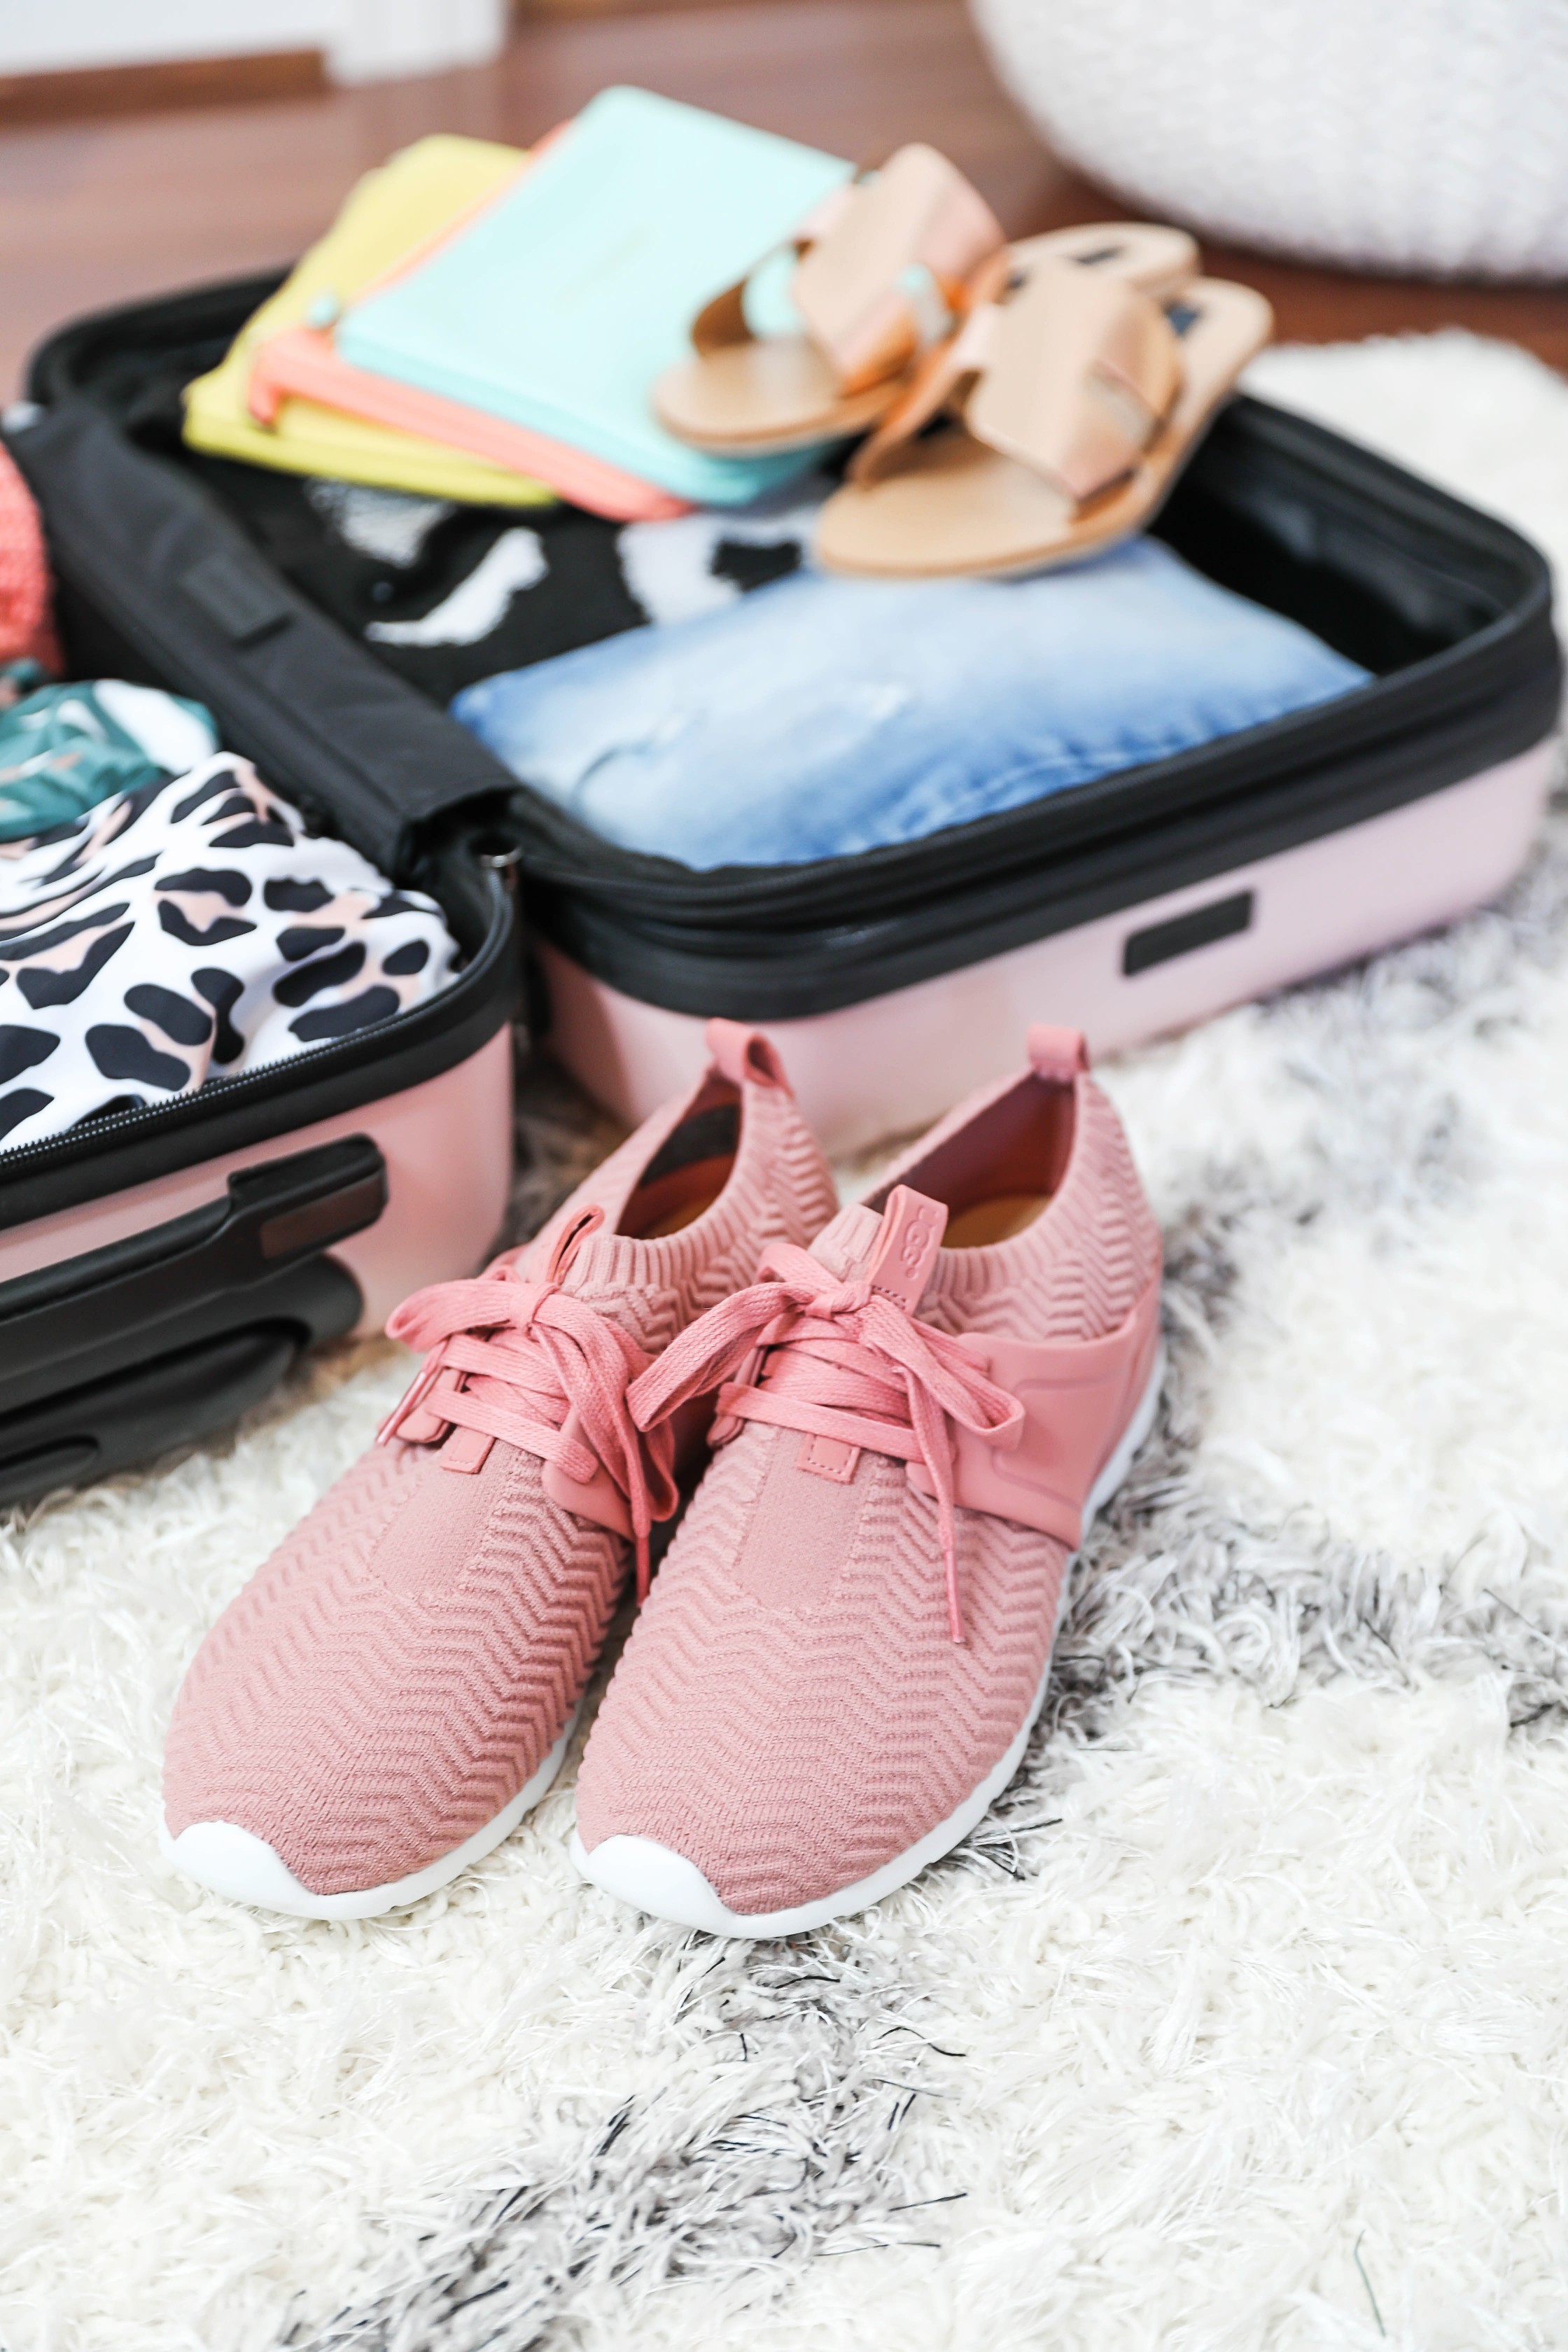 Packing tips for a trip from the queen of overpacking! I use the cutest Nordstrom suitcase and Jon Hart luggage for my trips! Spring break packing with the latest spring trends! How cute are these ugg sneakers, Marc Fisher wedges? Details on fashion blog daily dose of charm by lauren lindmark